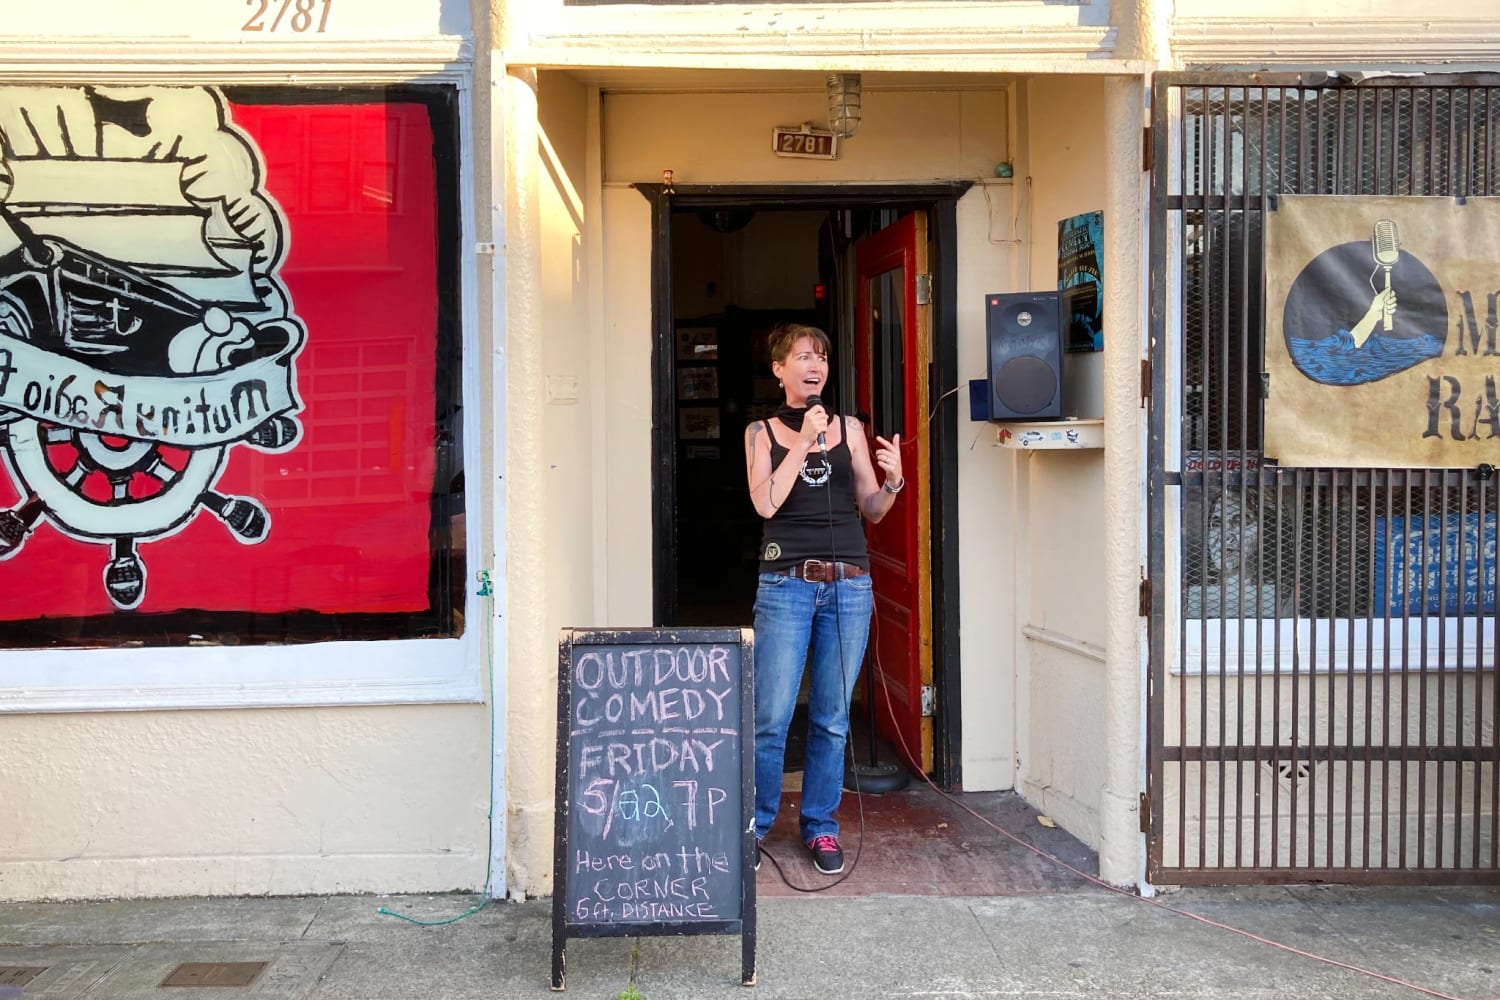 Barely legal comedy: Mutiny FM hosts sidewalk stand-up in the Mission